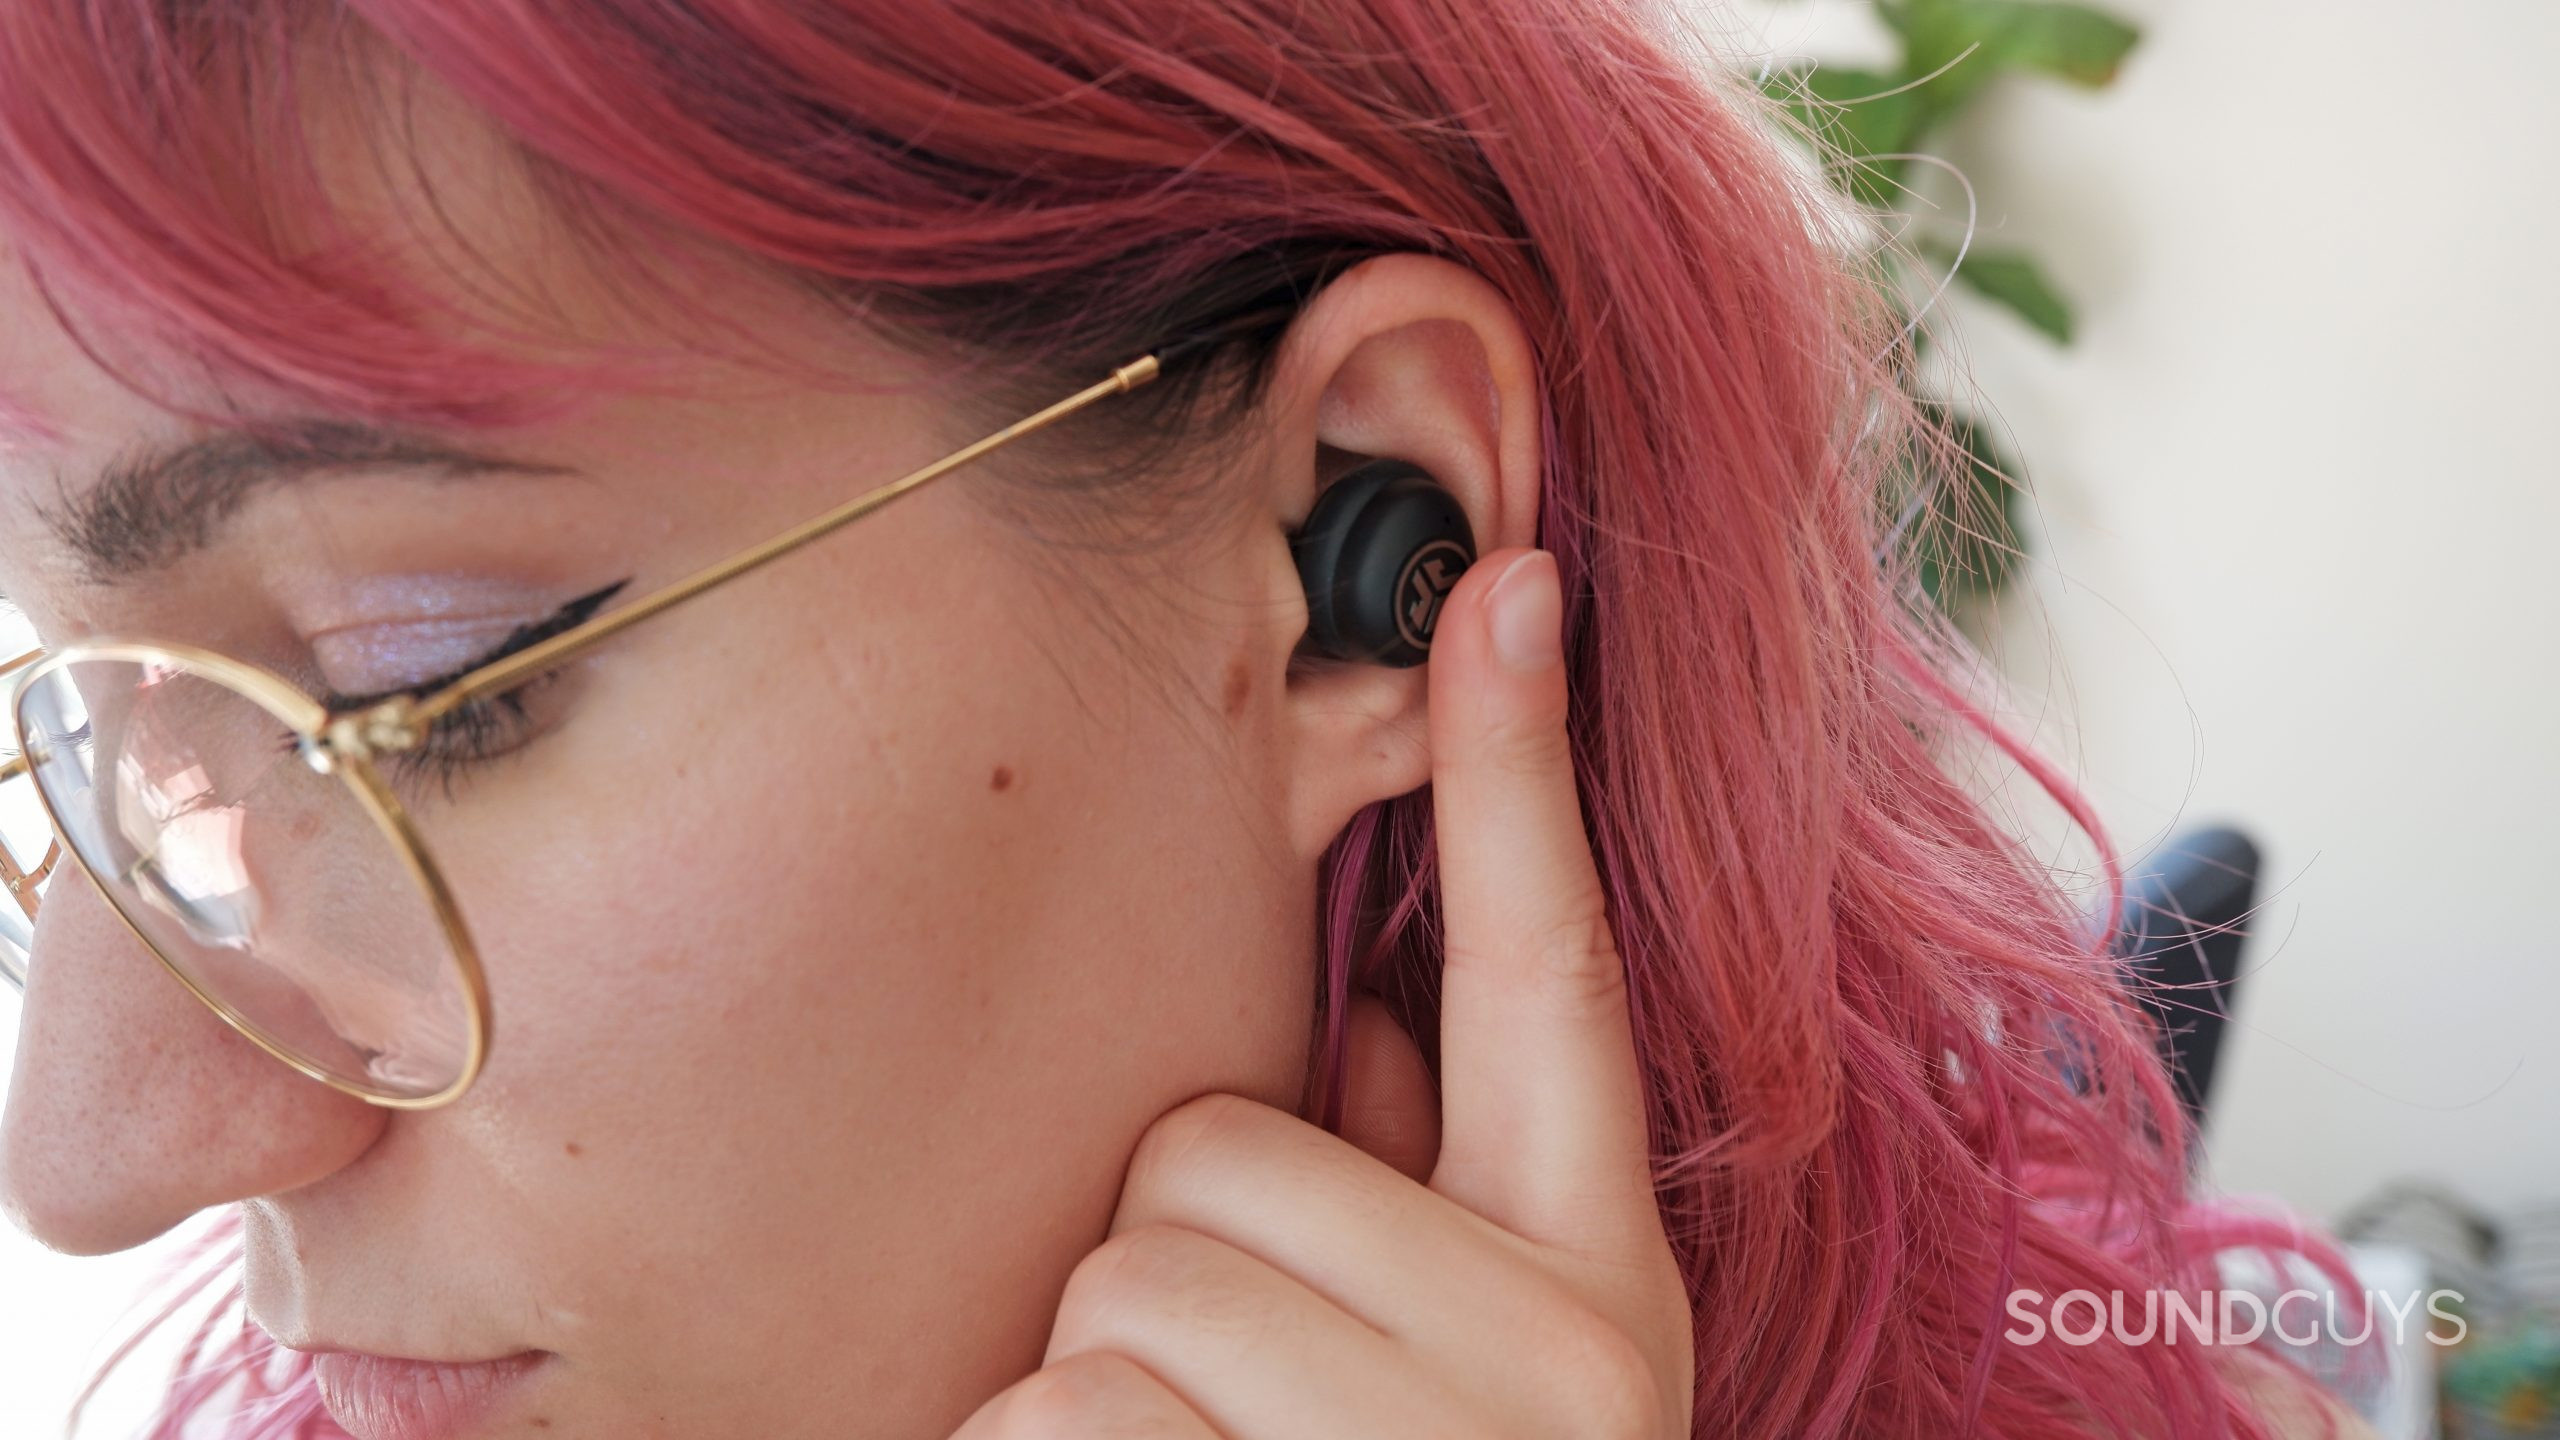 The JLab JBuds Air Pro being worn, with the person touching the earbud touch sensor.